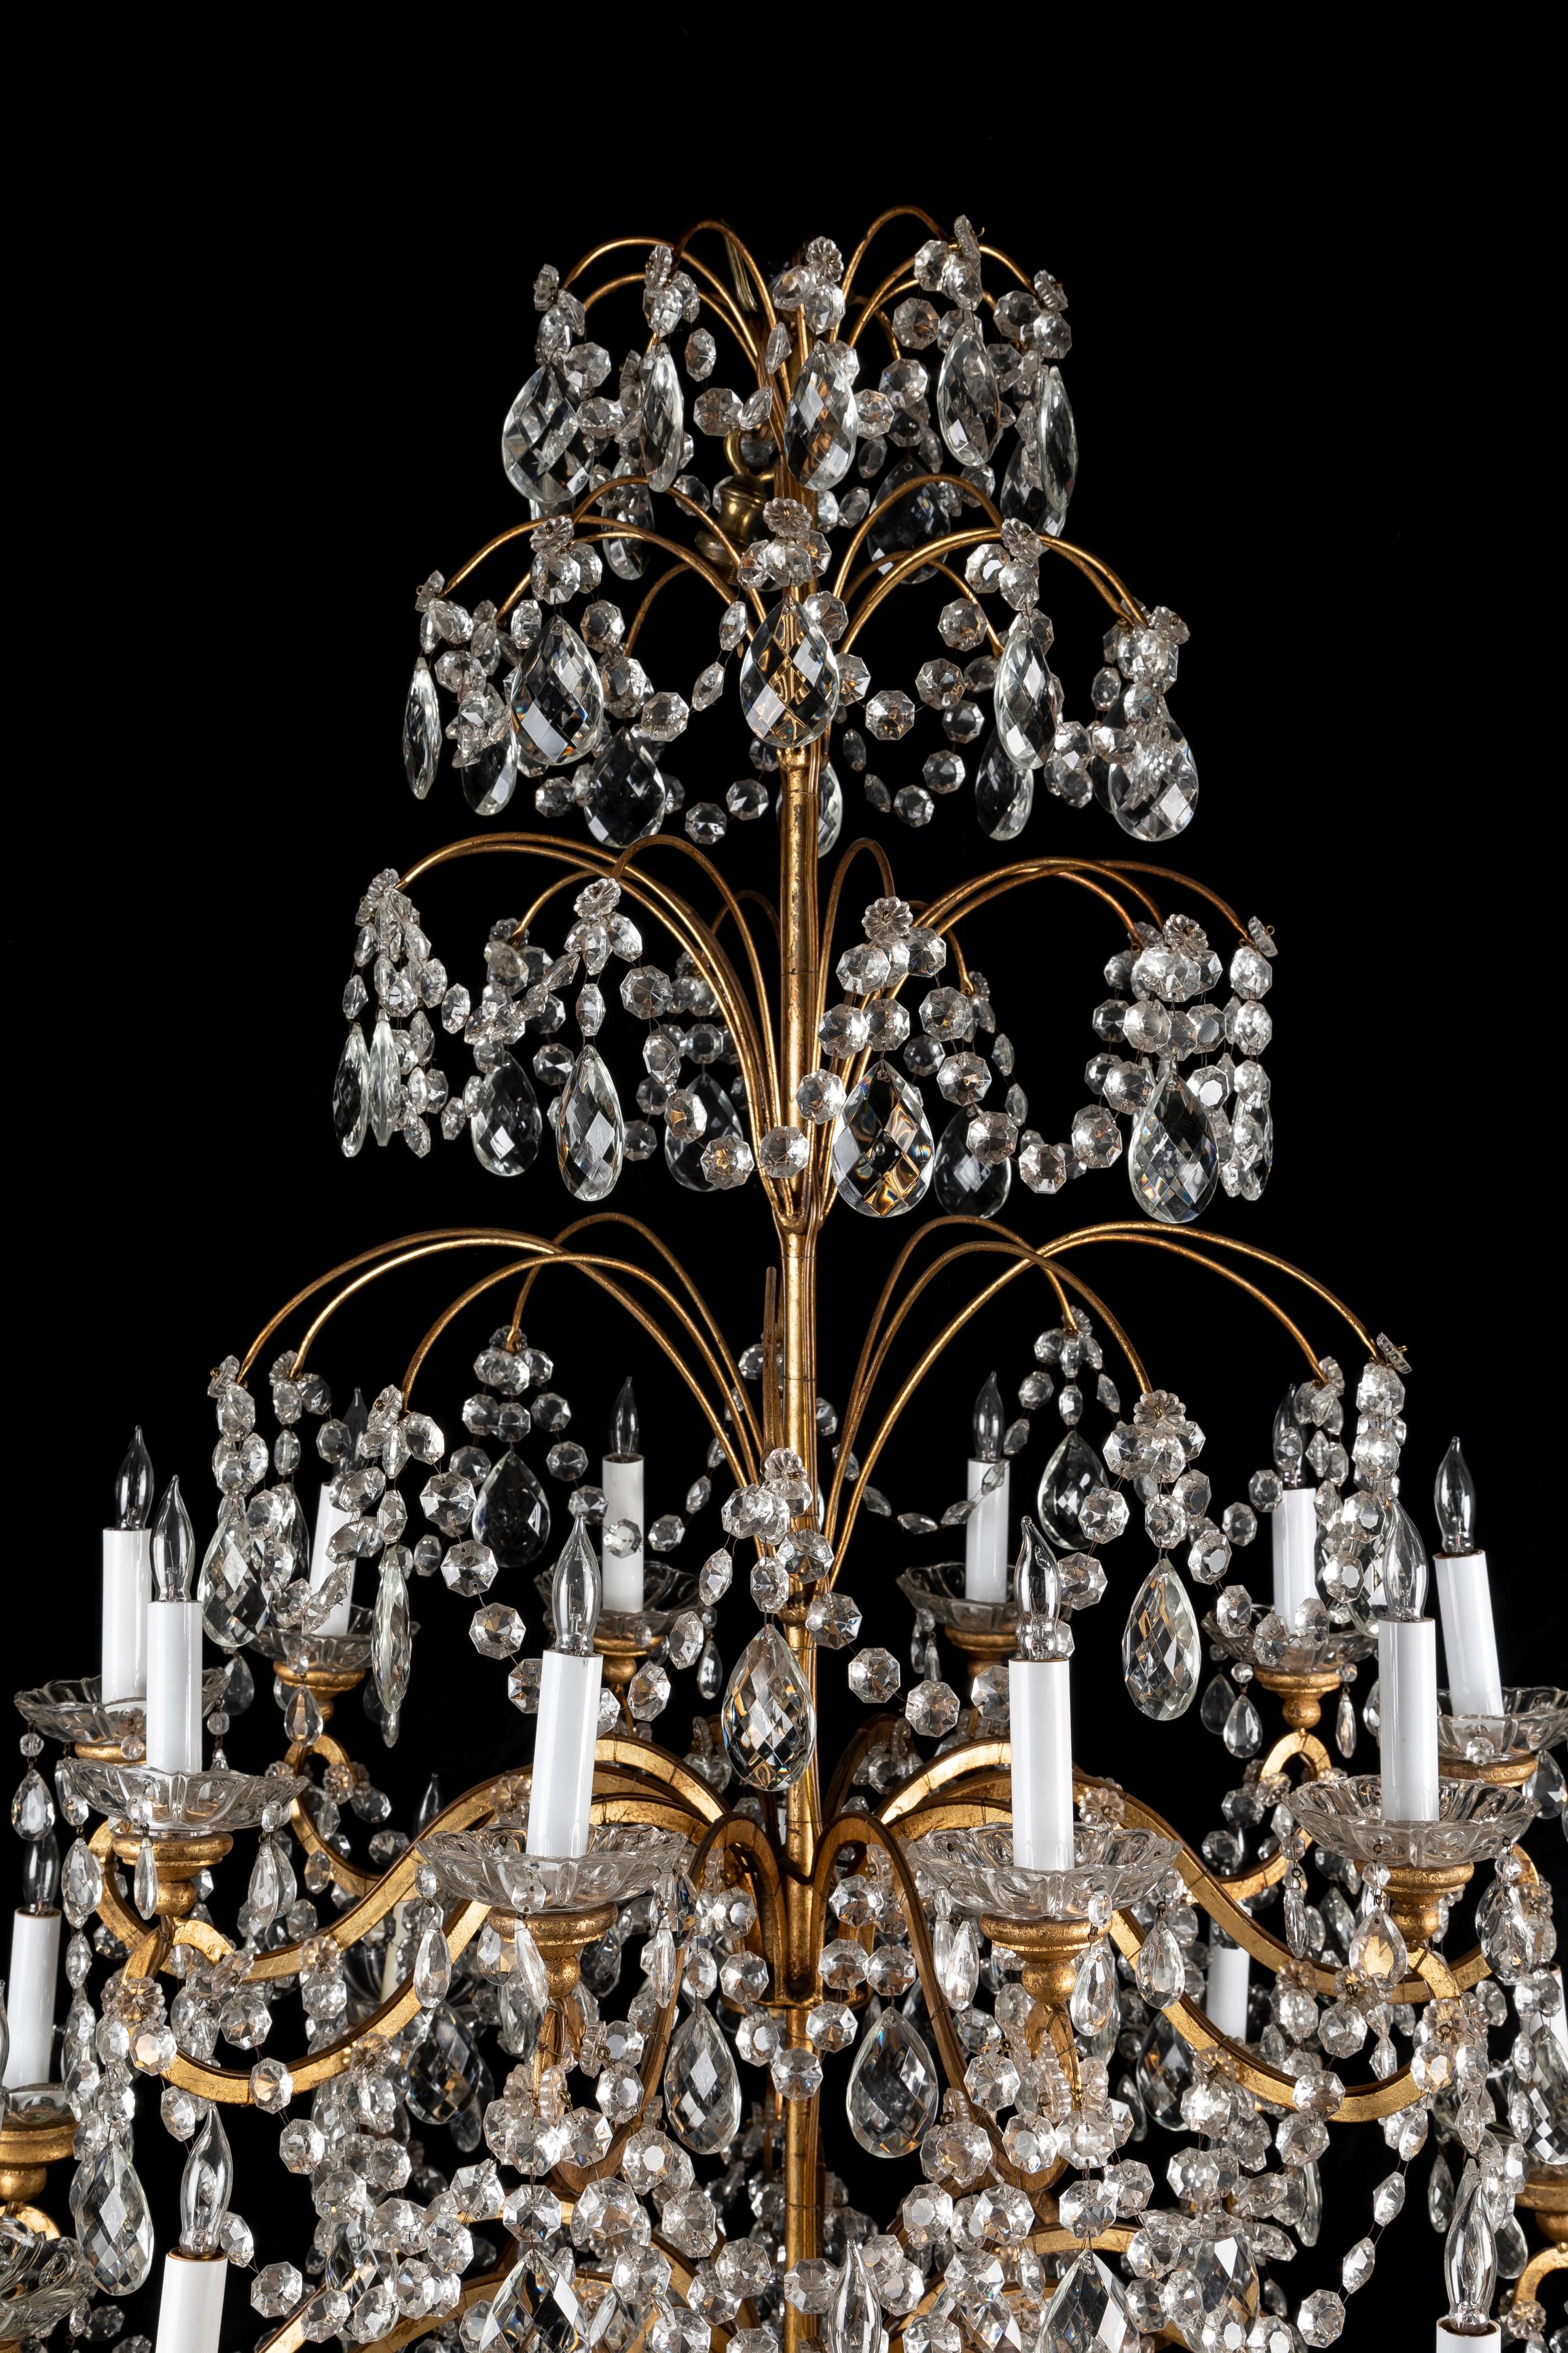  Pair of Large Antique French Louis XVI Style Gilt Bronze & Crystal Chandeliers  In Good Condition For Sale In New York, NY